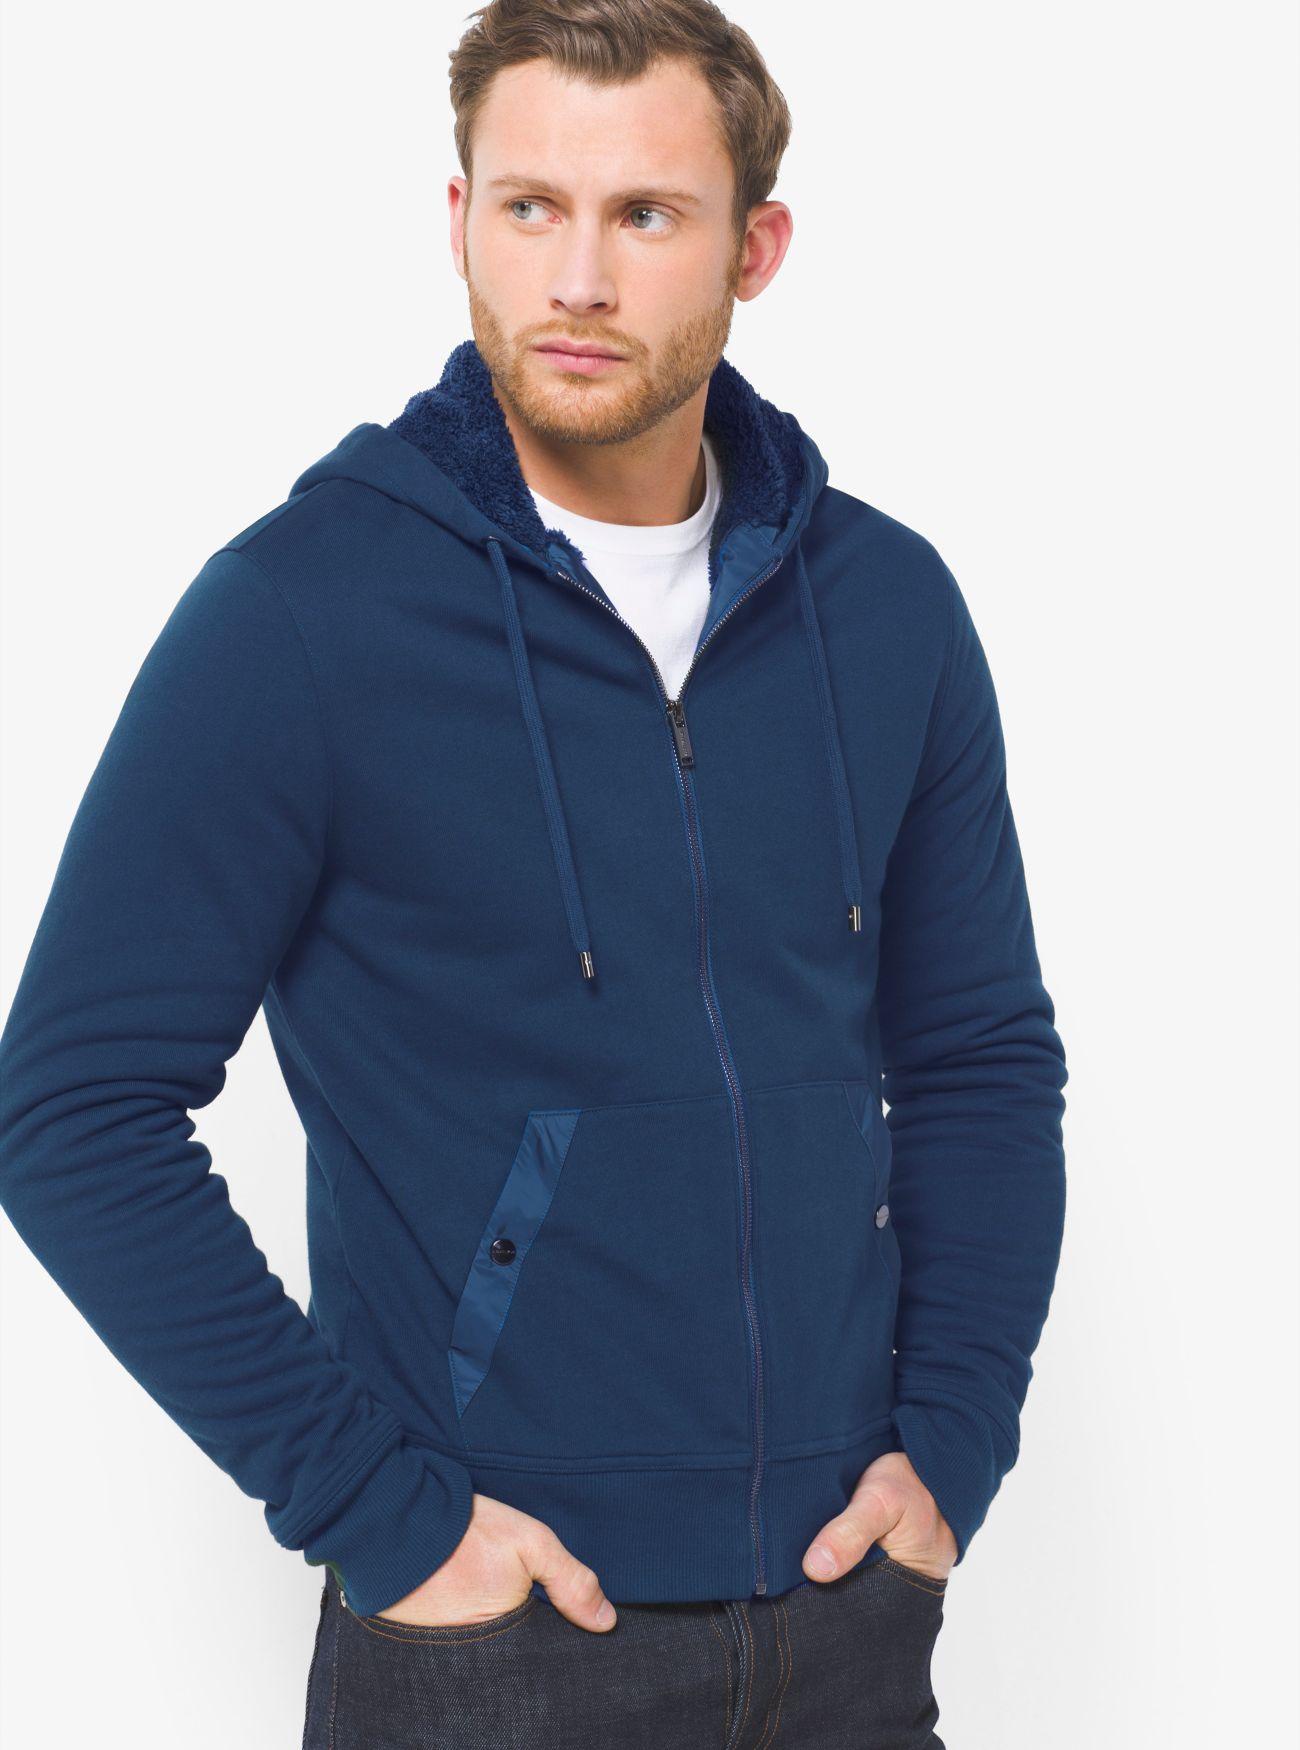 Lyst - Michael kors Sherpa-lined Zip-up French Terry Hoodie in Blue for Men